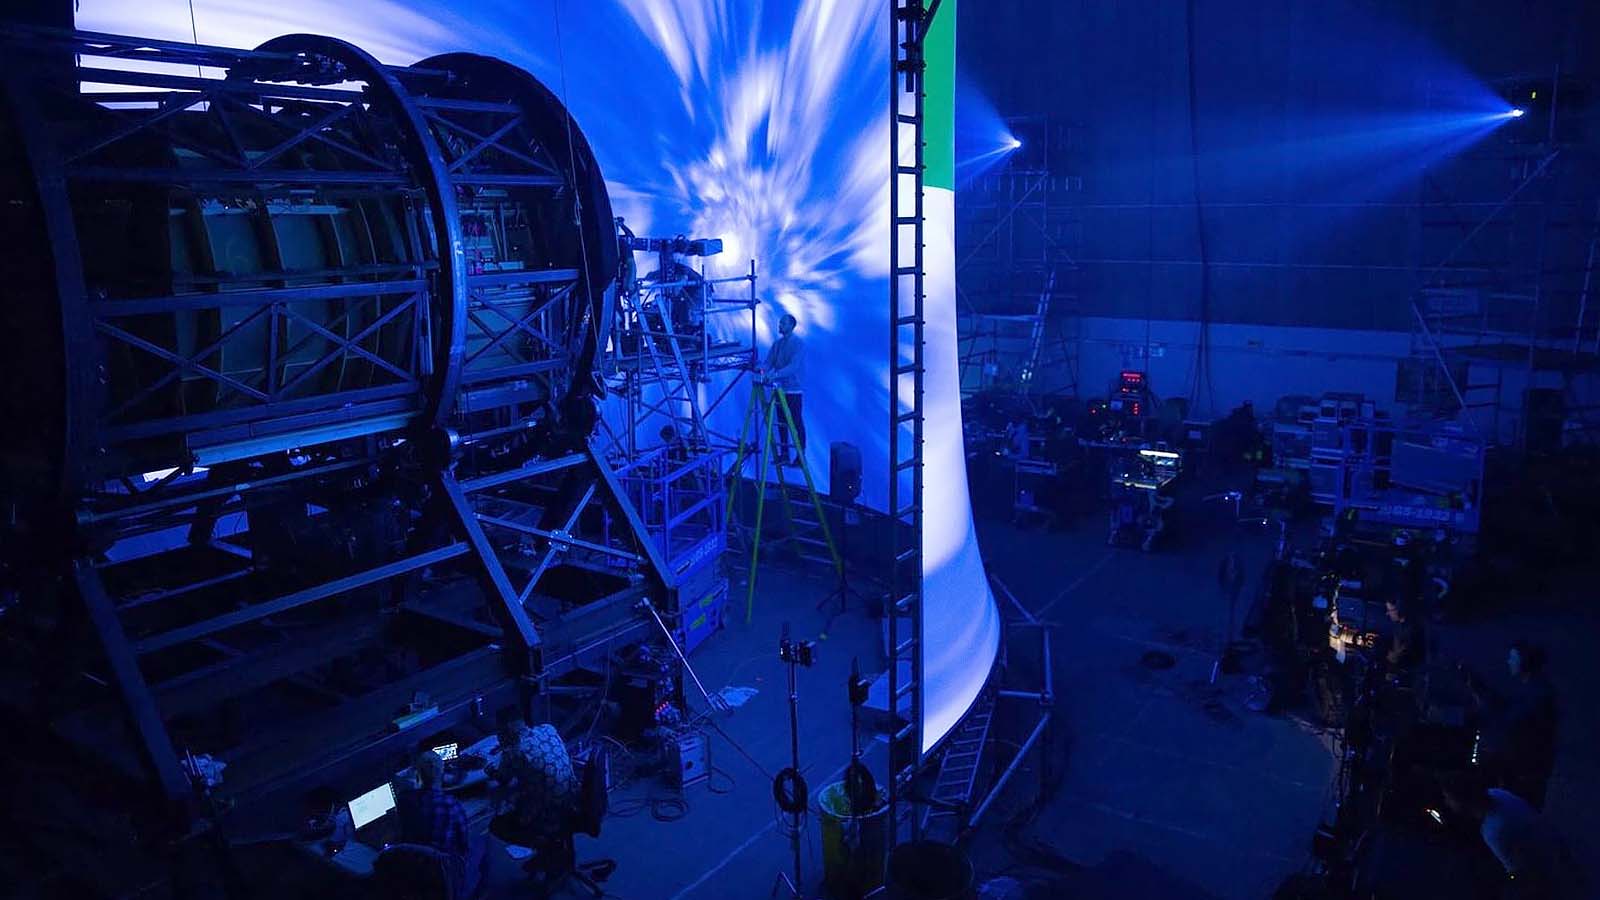 Solo used massive projection screens to create a number of in-camera visual effects. Image © ILM